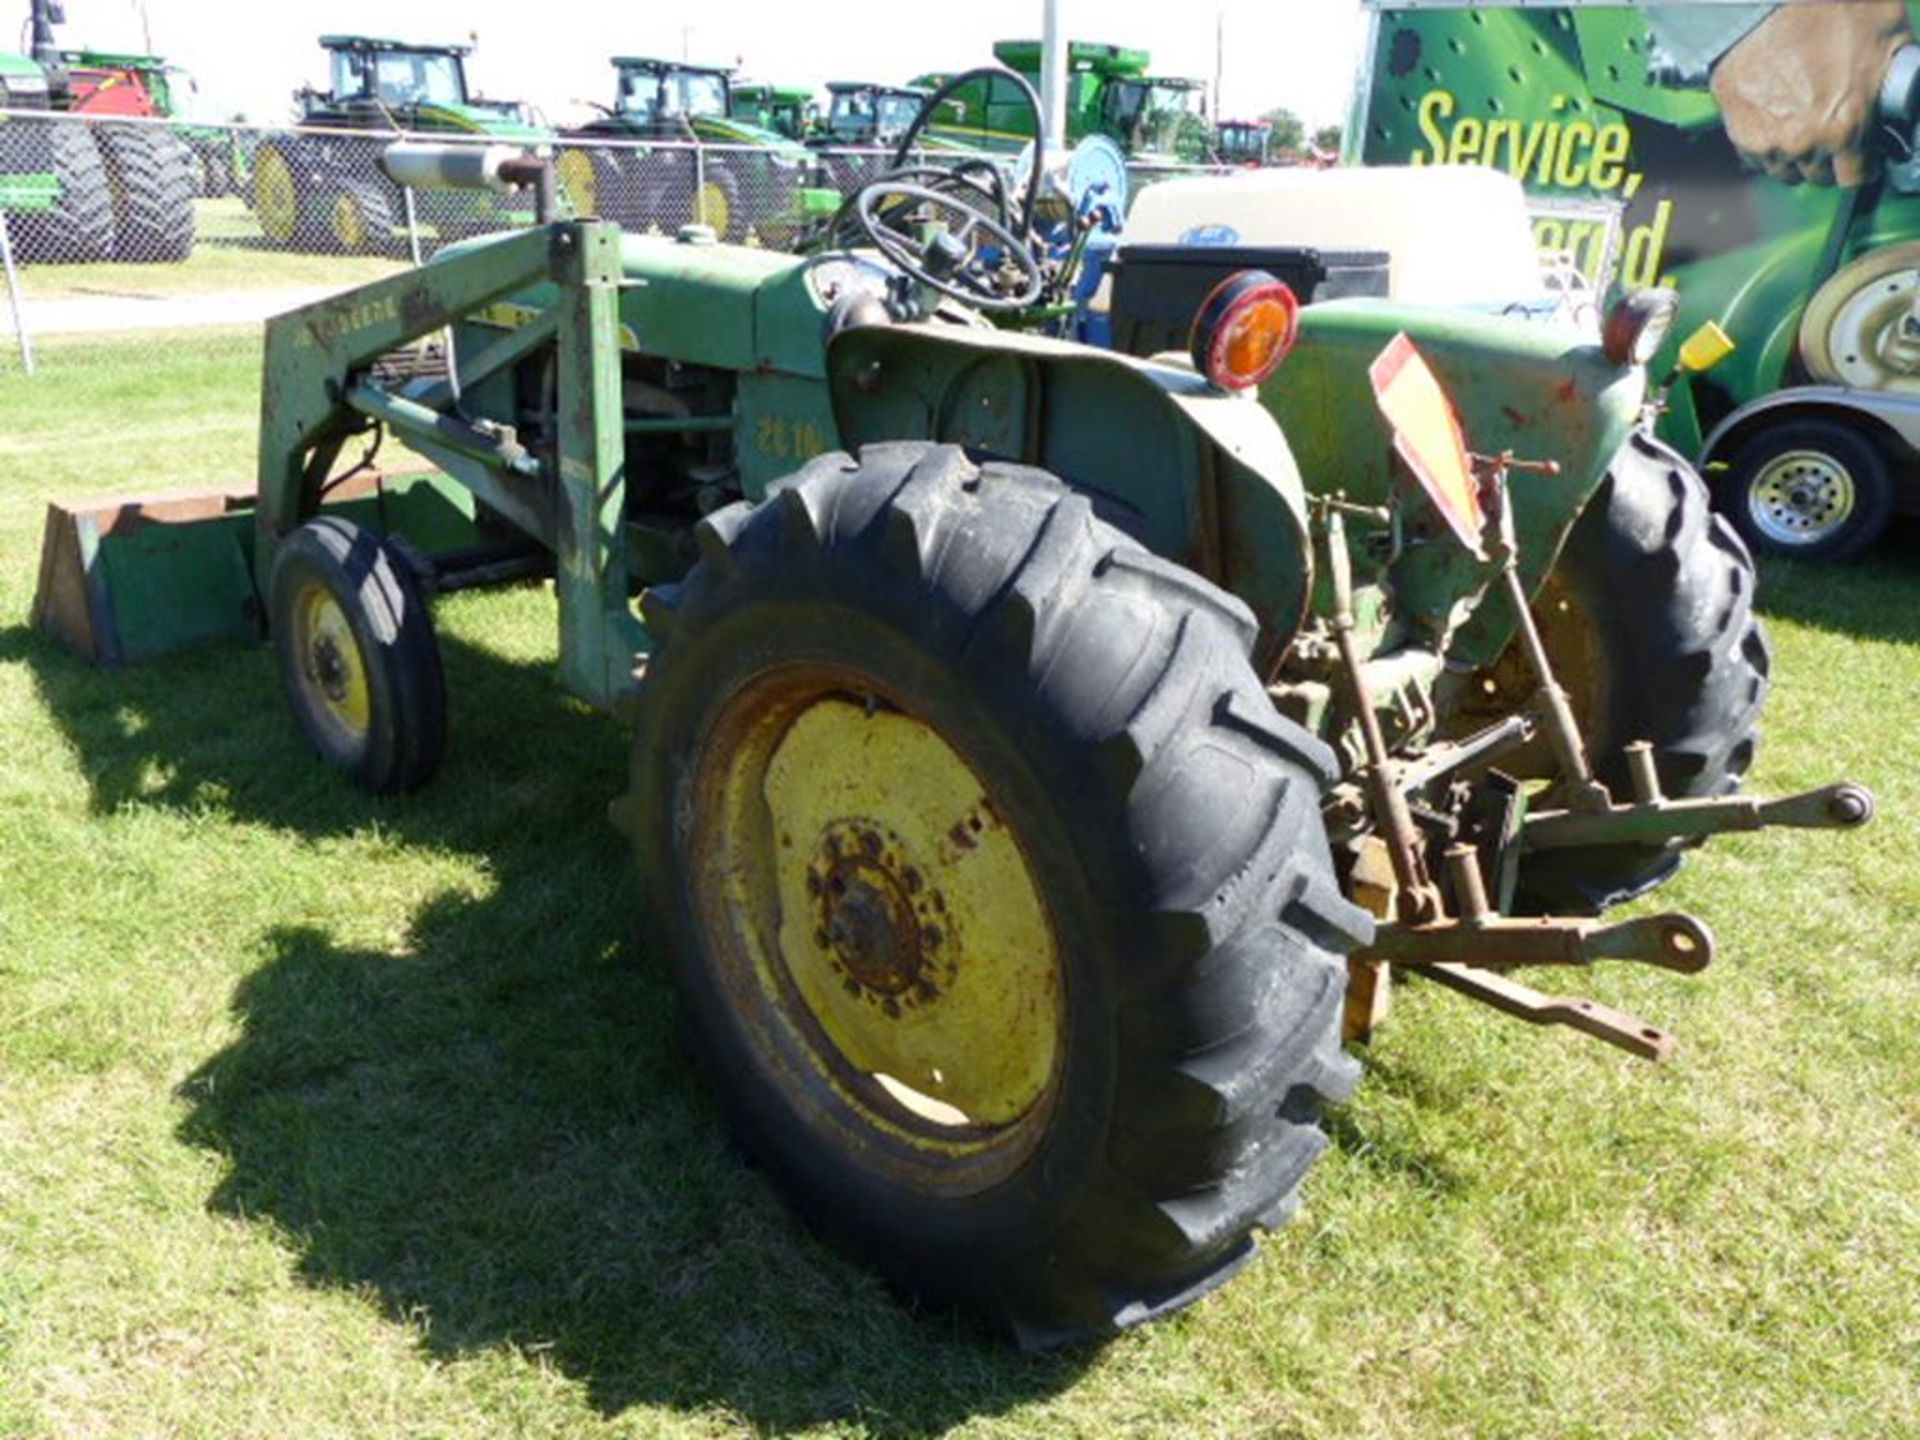 JD 2010 TRACTOR, GAS, 3 PT, 540 PTO, REAR SCV, 36A LOADER WITH 78" BUCKET, SHOWS 3674HR - Image 2 of 4